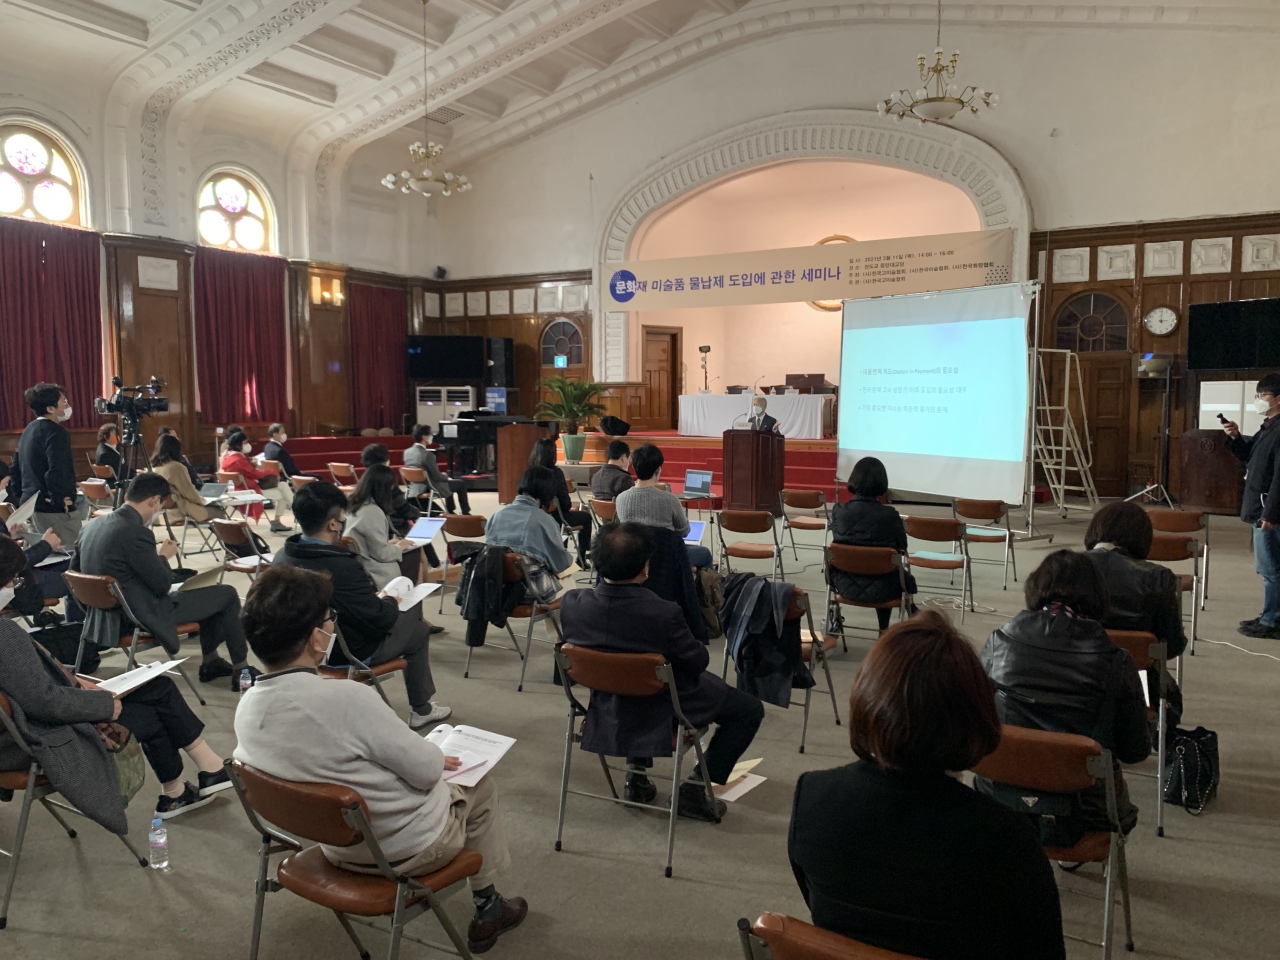 A seminar to discuss donations of artwork as a form of tax payment was held on Thursday at the Cheondogyo Central Temple in central Seoul (Korea Ancient Art Association)